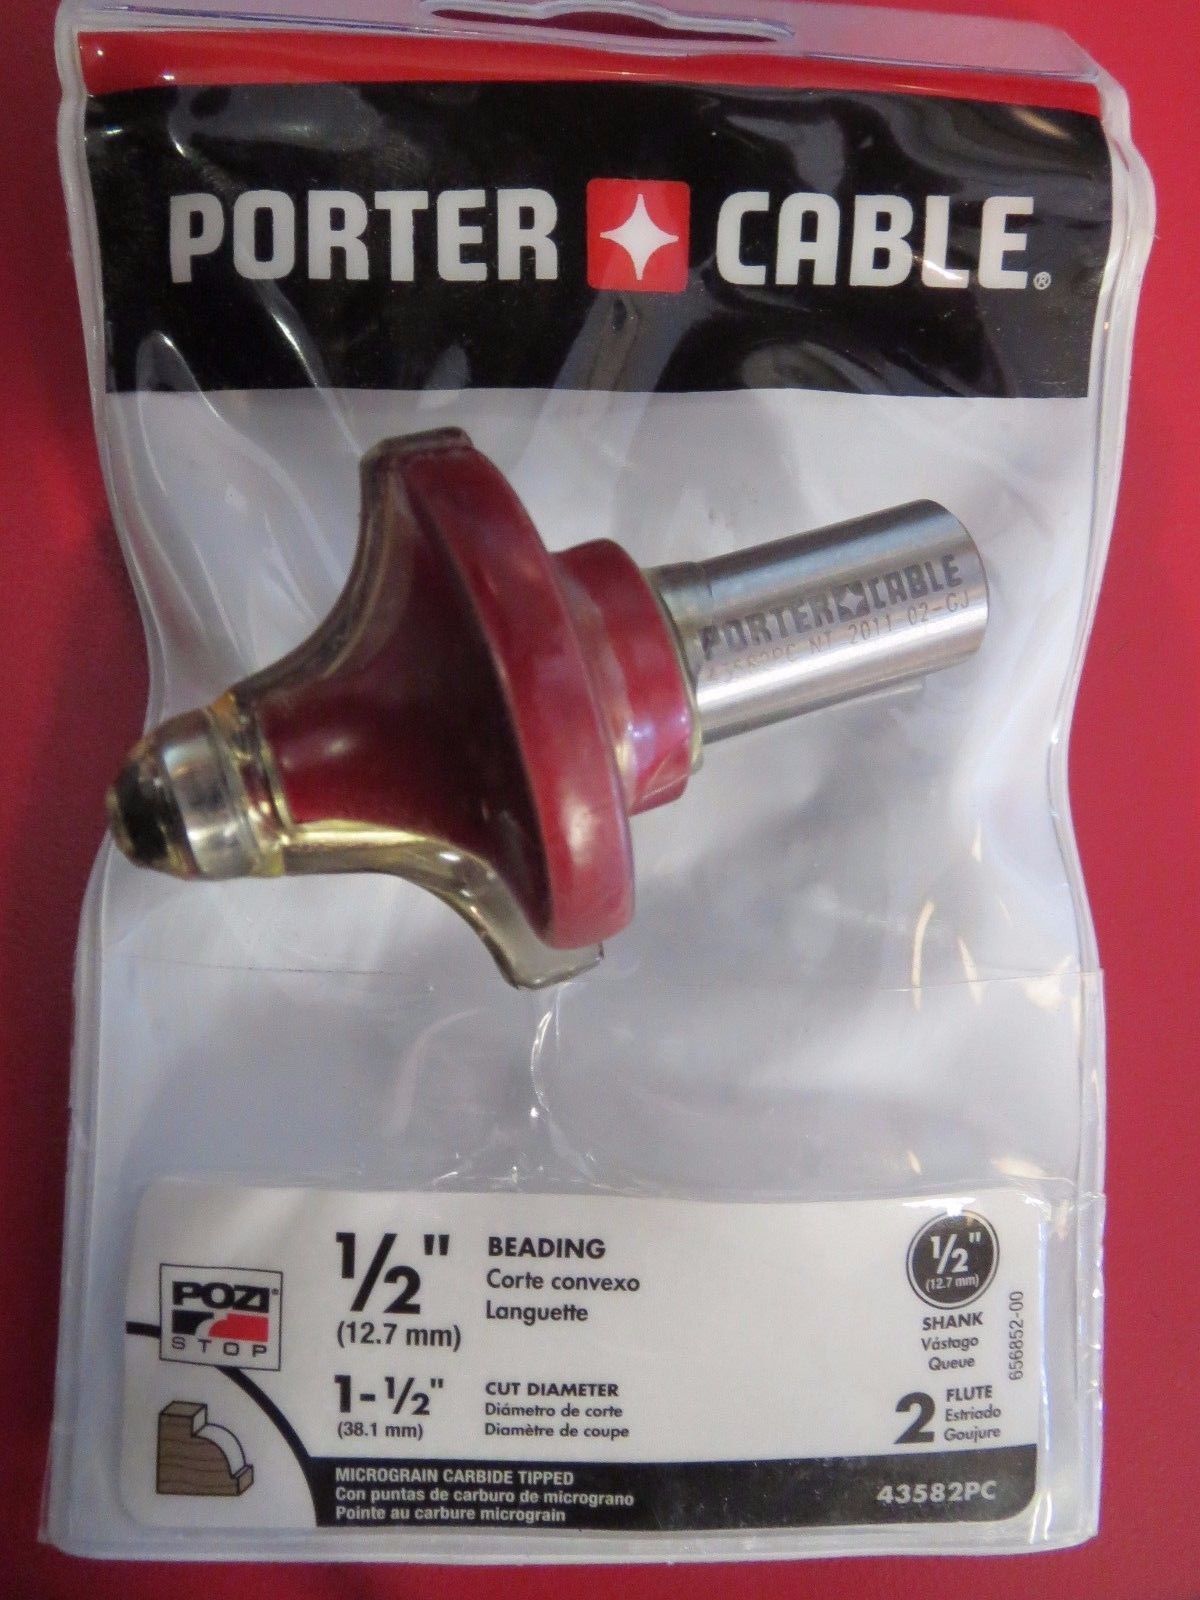 Porter Cable 43582PC 1/2" Beading Router Bit 1/2" Shank